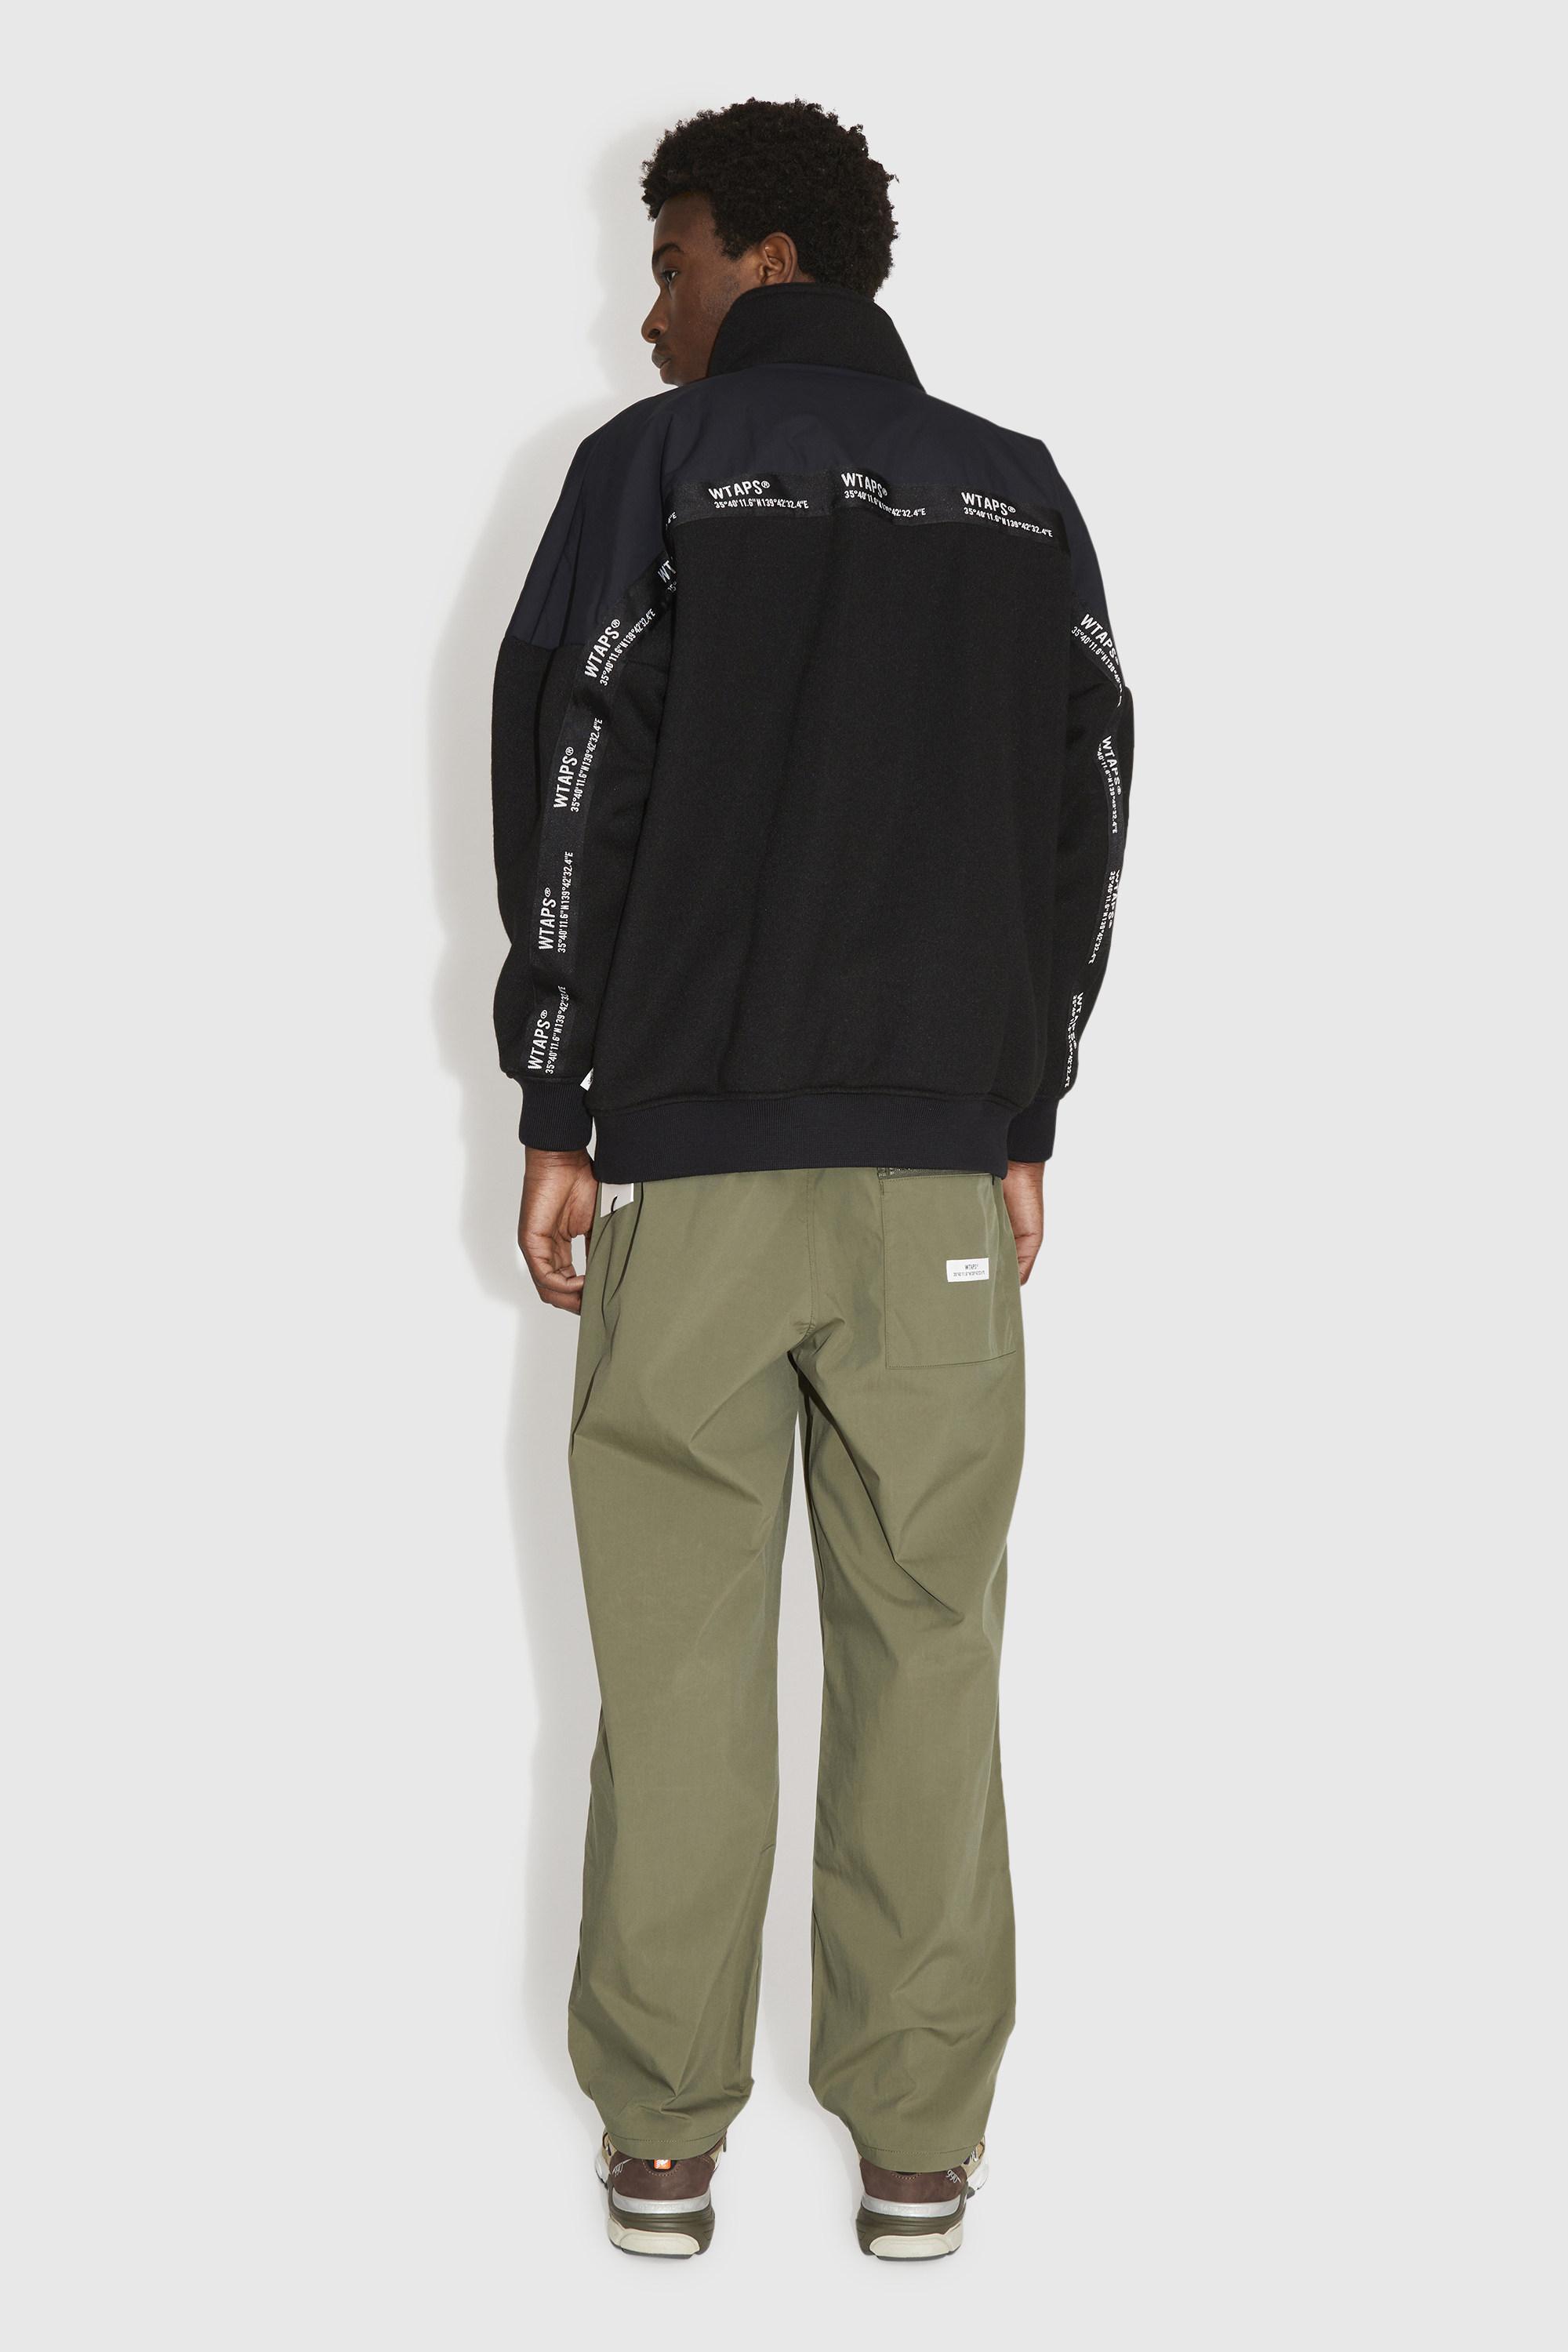 WTAPS SEAGULL 02 / TROUSERS Olive drab | WoodWood.com